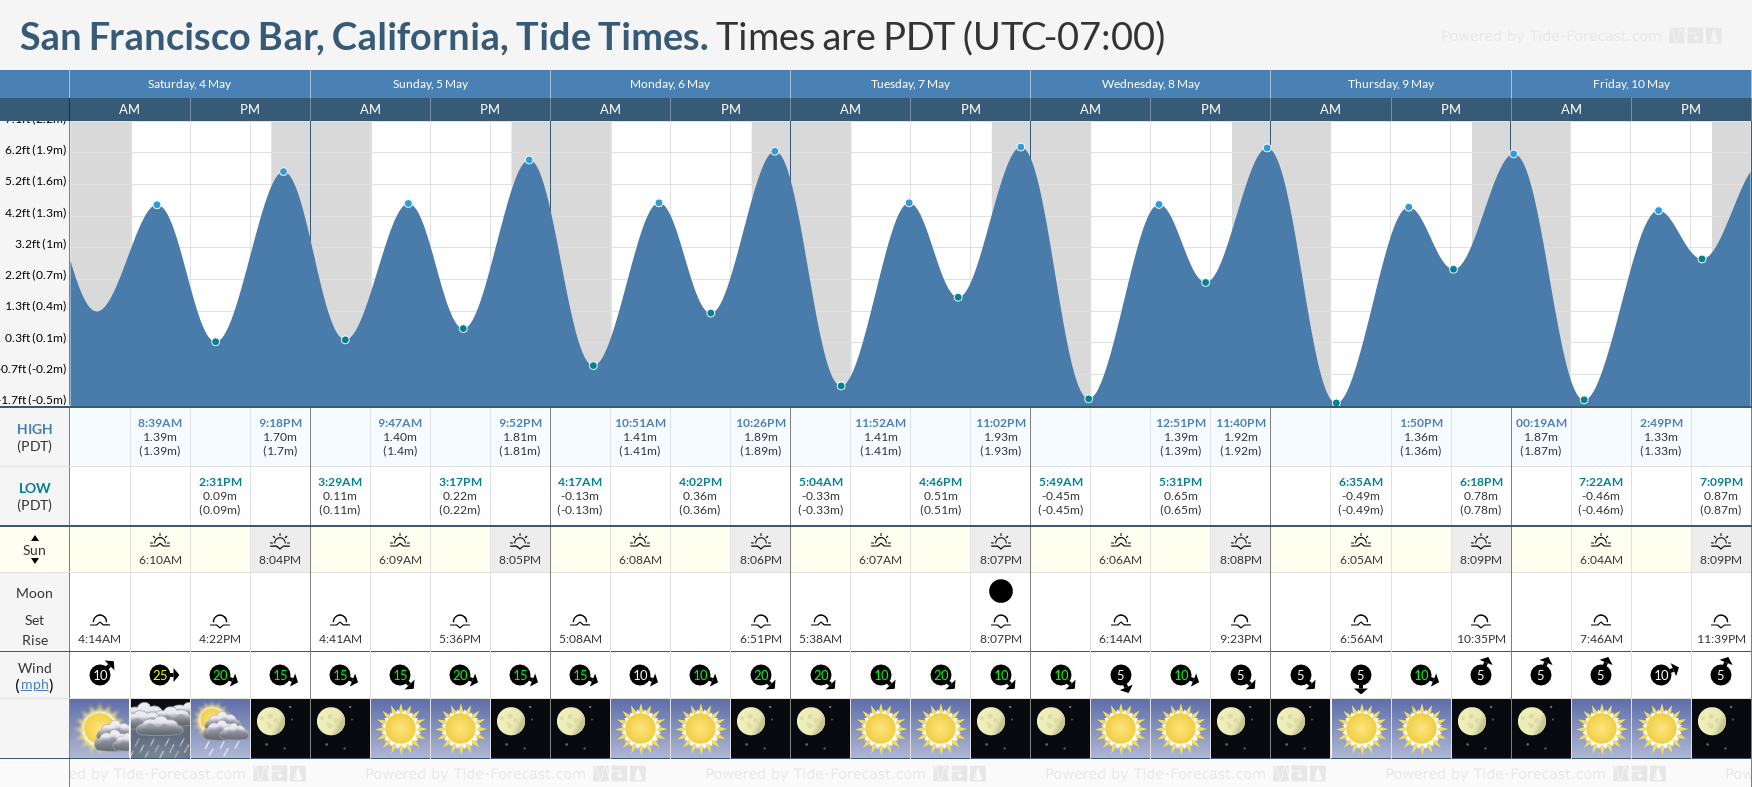 San Francisco Bar, California Tide Chart including high and low tide tide times for the next 7 days